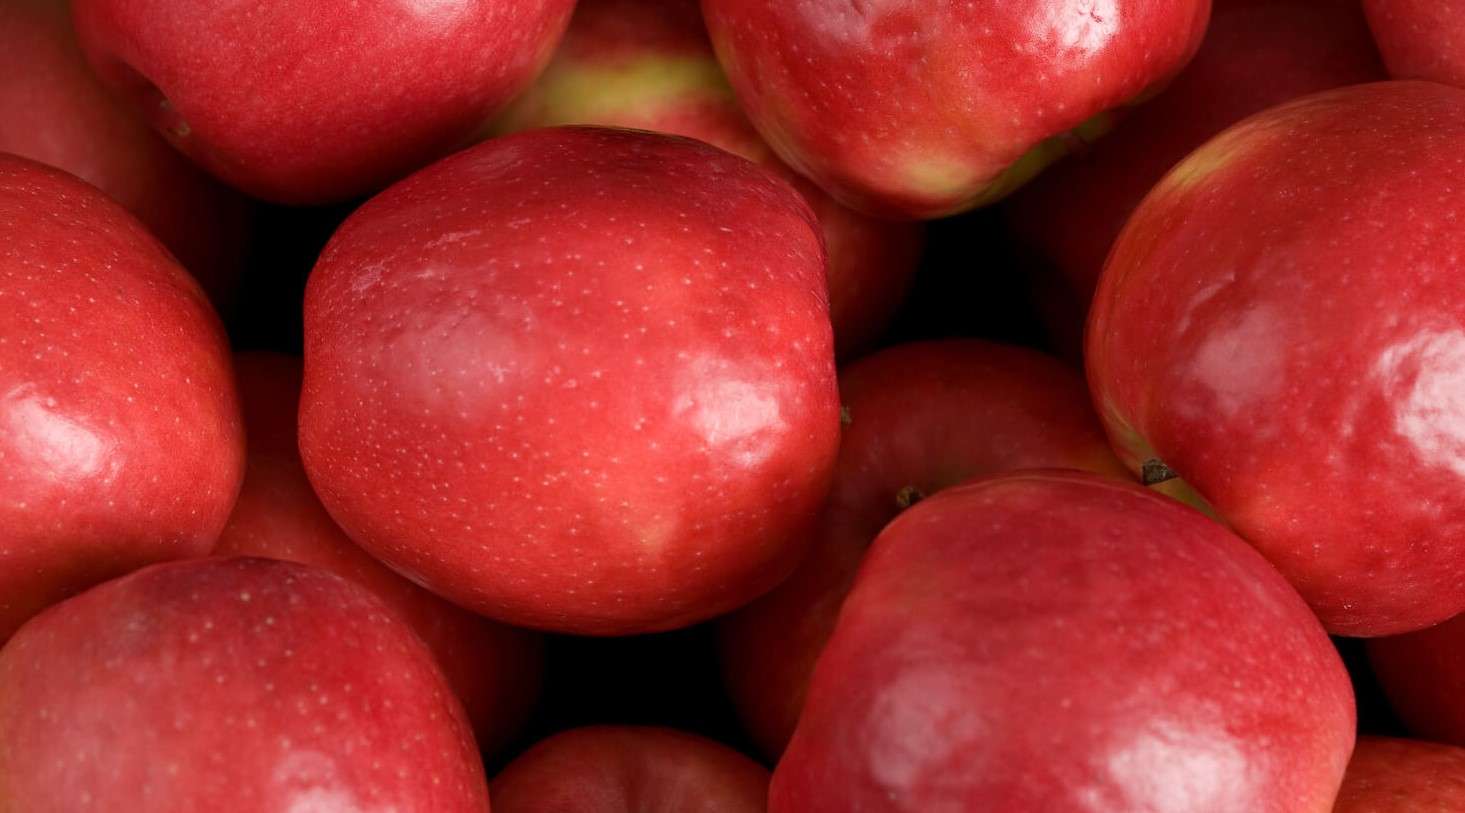 Pink Lady and Bravo apples among the healthiest, study finds